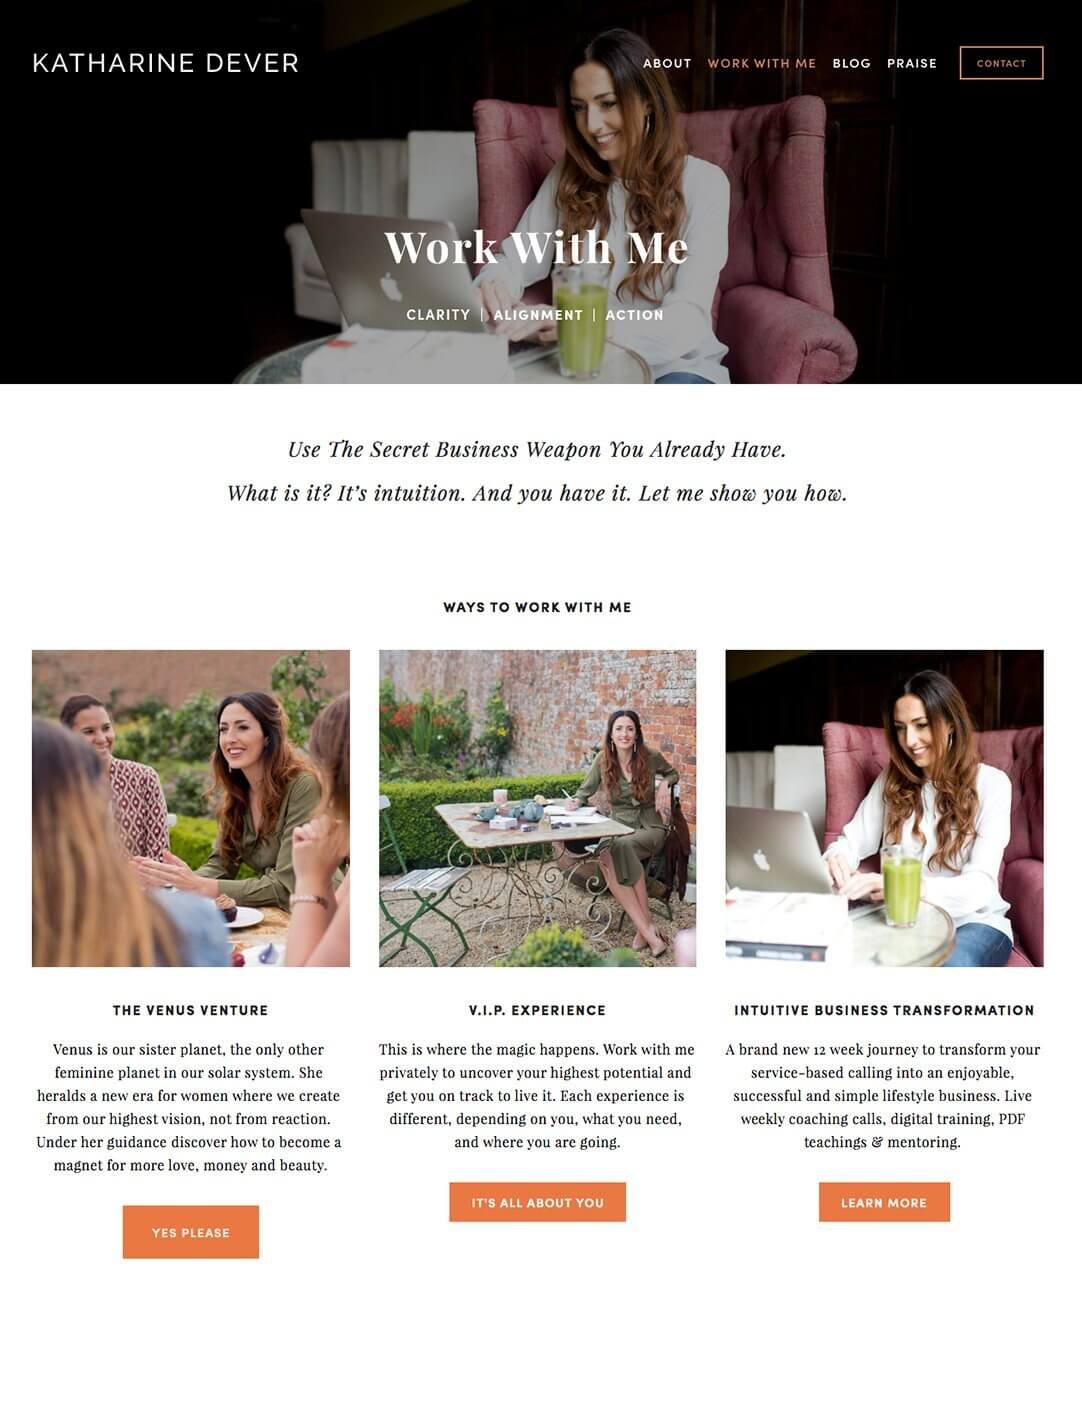 stylish brand and website design giving female entrepreneurs a website they feel confident with